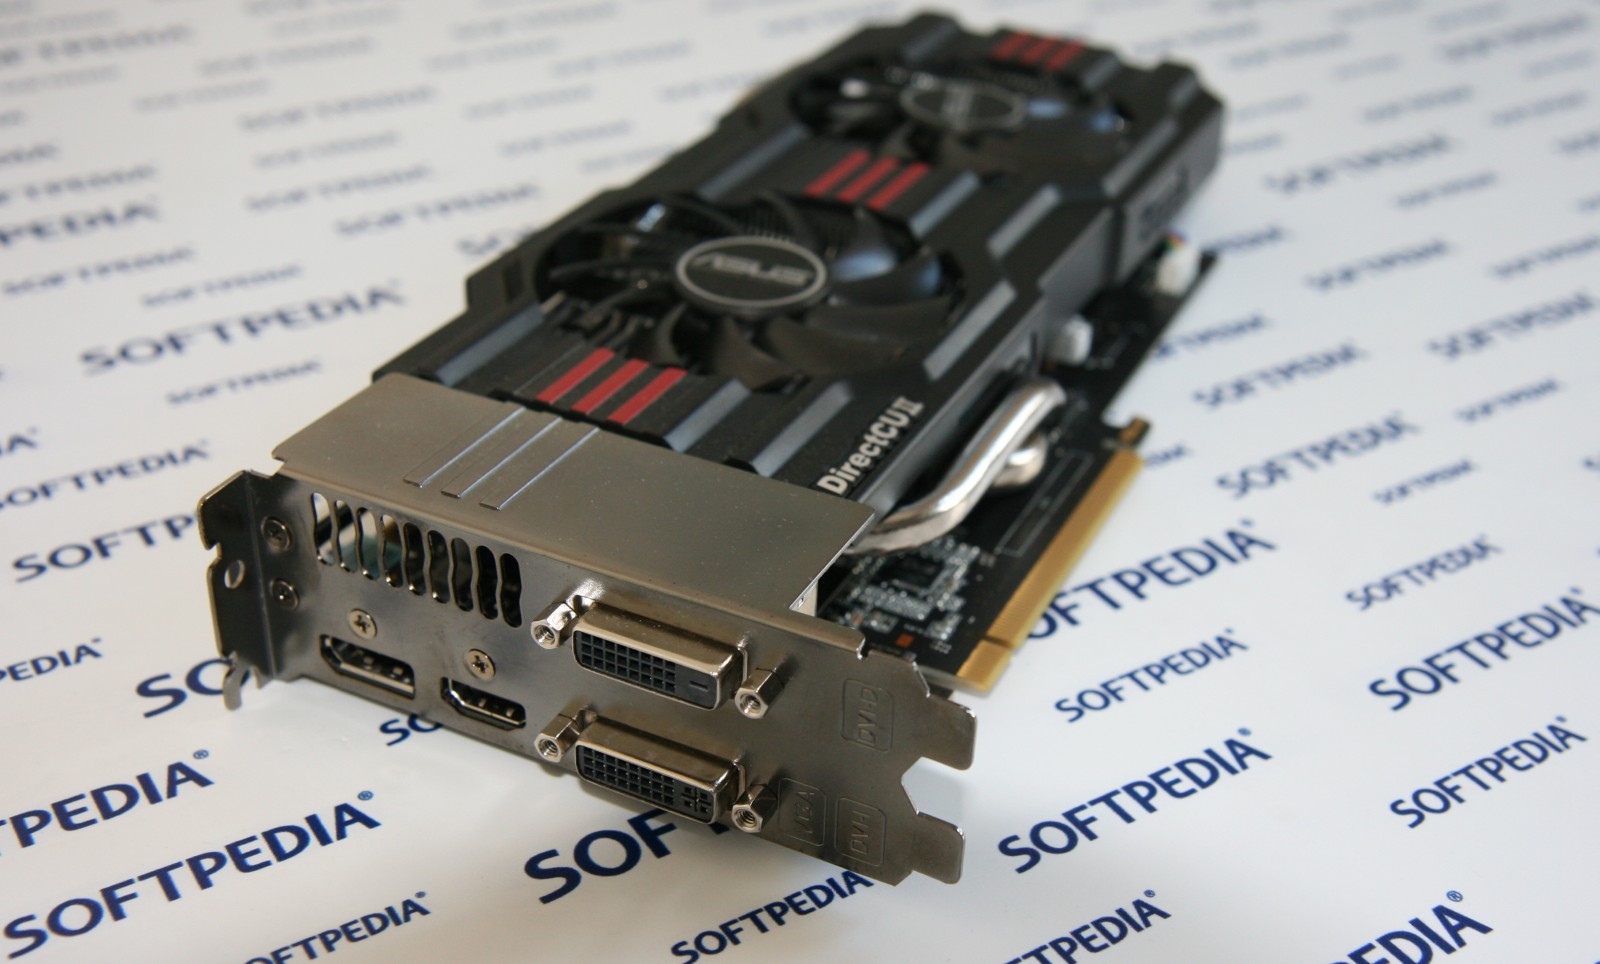 New Bios Released For Asus Gtx 660 Ti Directcu Ii Graphics Cards